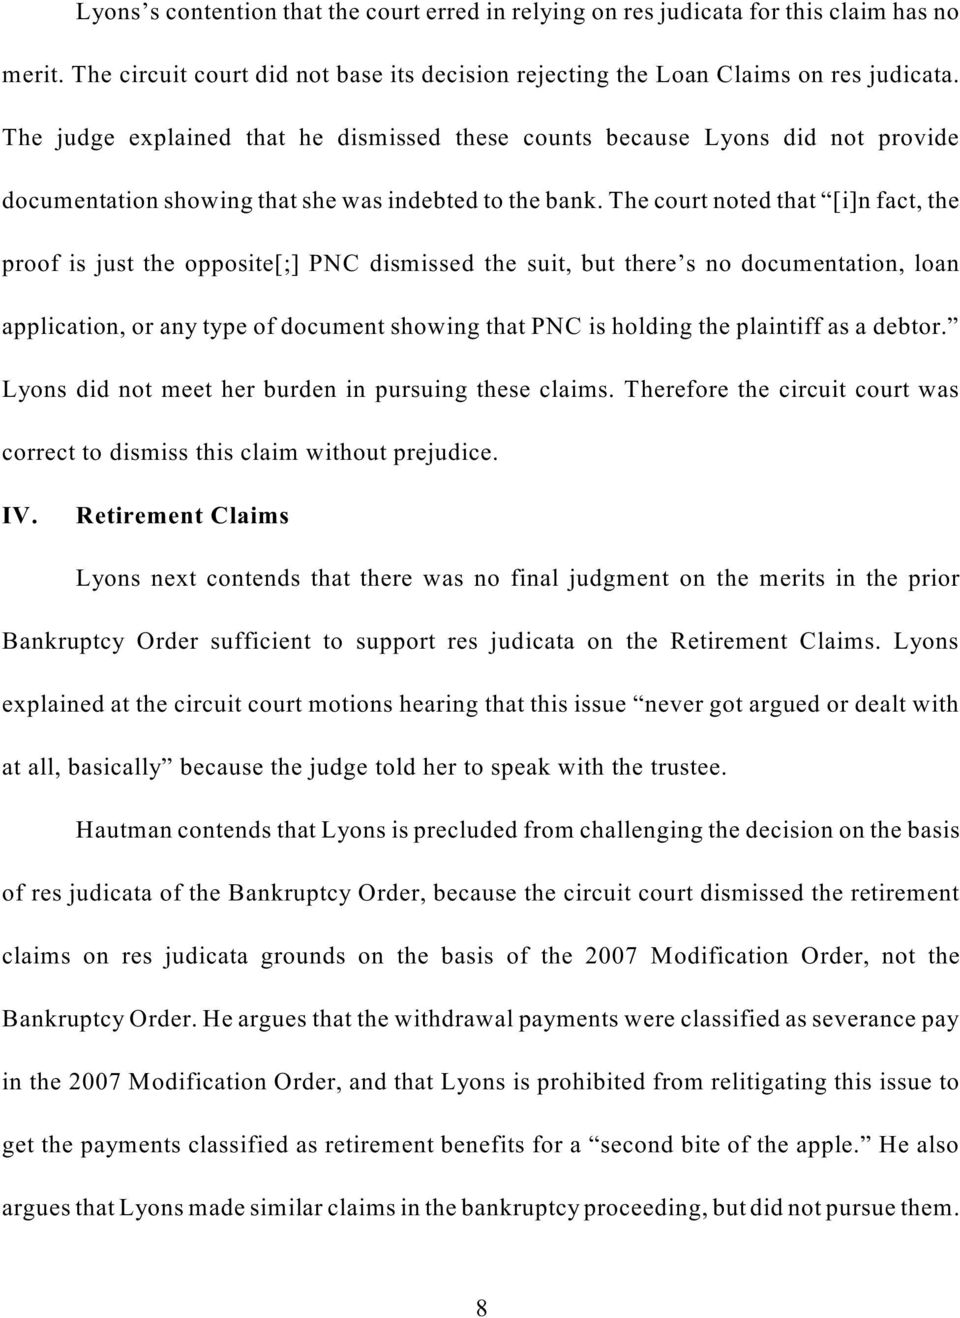 The court noted that [i]n fact, the proof is just the opposite[;] PNC dismissed the suit, but there s no documentation, loan application, or any type of document showing that PNC is holding the